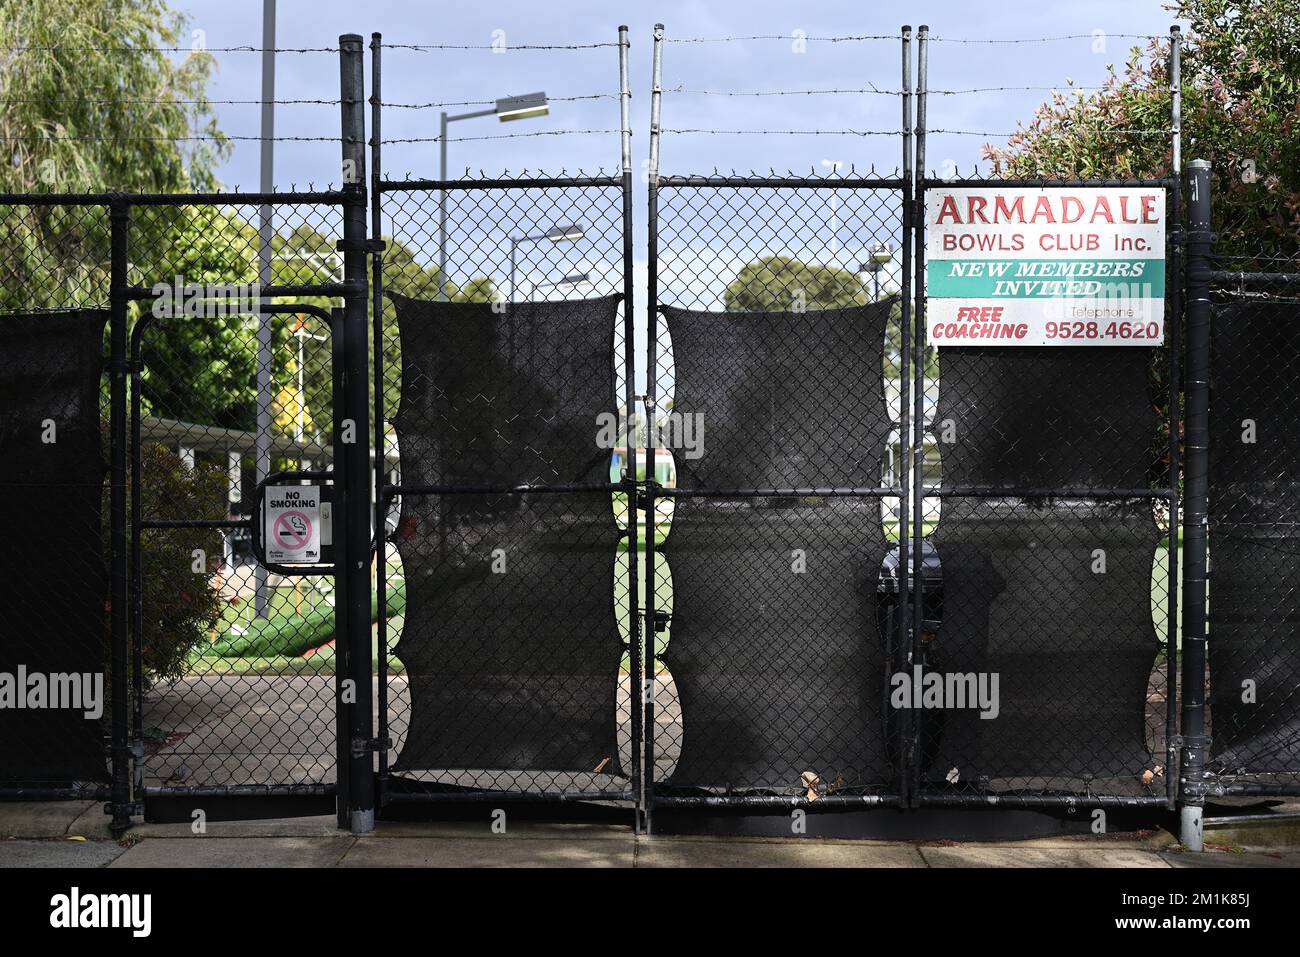 Western entrance to the Armadale Bowls Club, on Nelson St, featuring signs, black fencing, and barbed wire Stock Photo